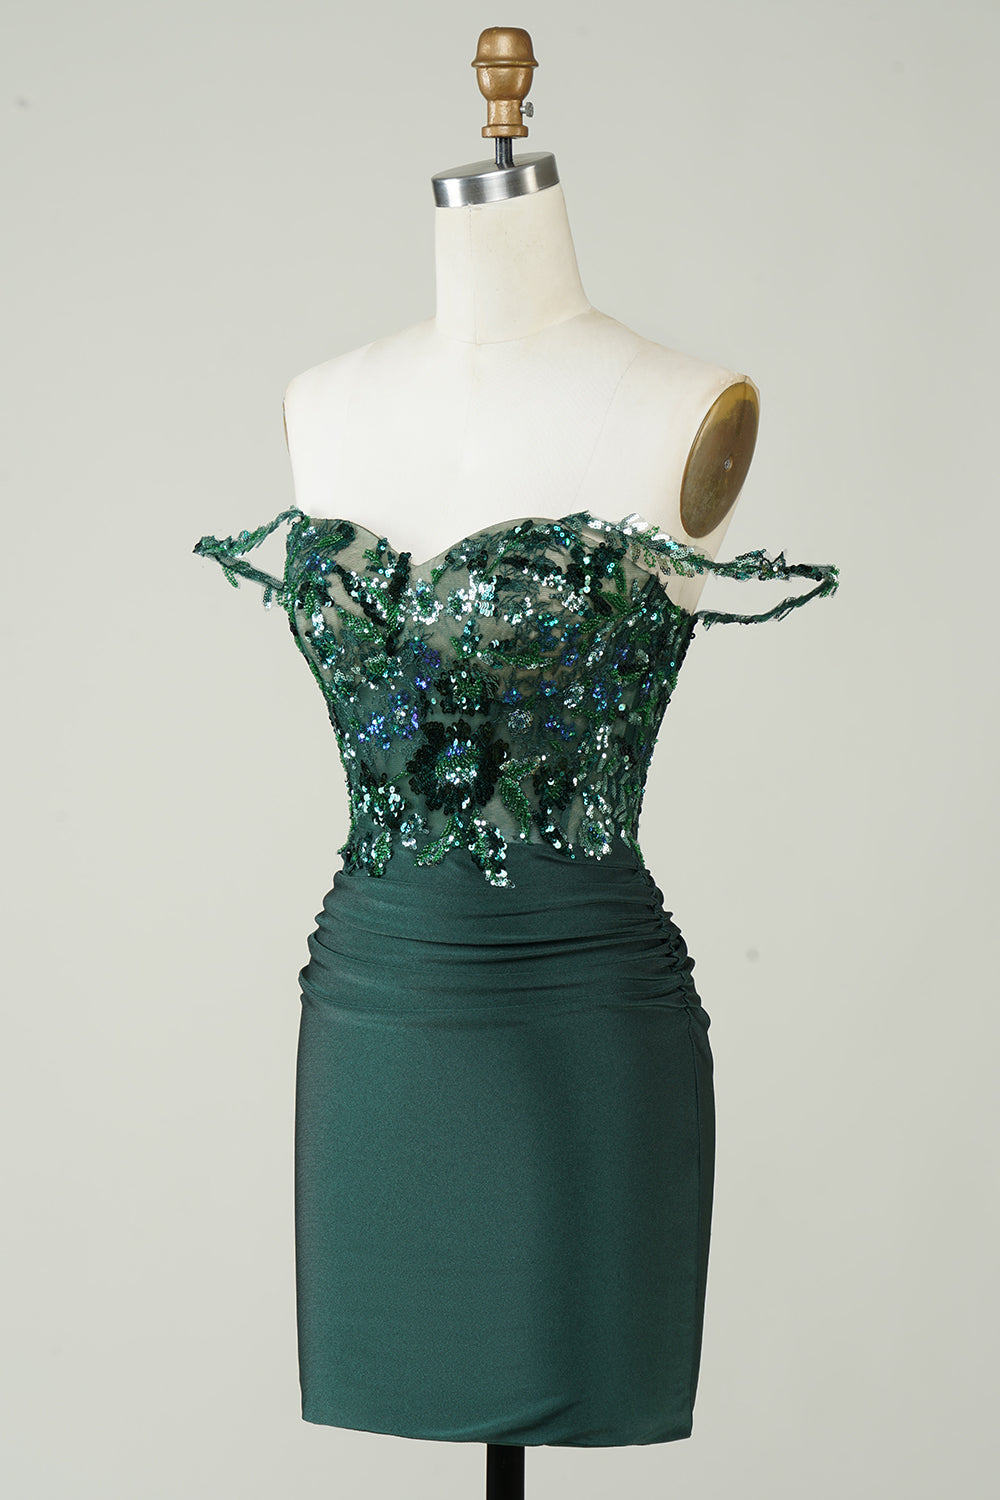 Unique Sheath Off the Shoulder Dark Green Short Homecoming Dress with Appliques